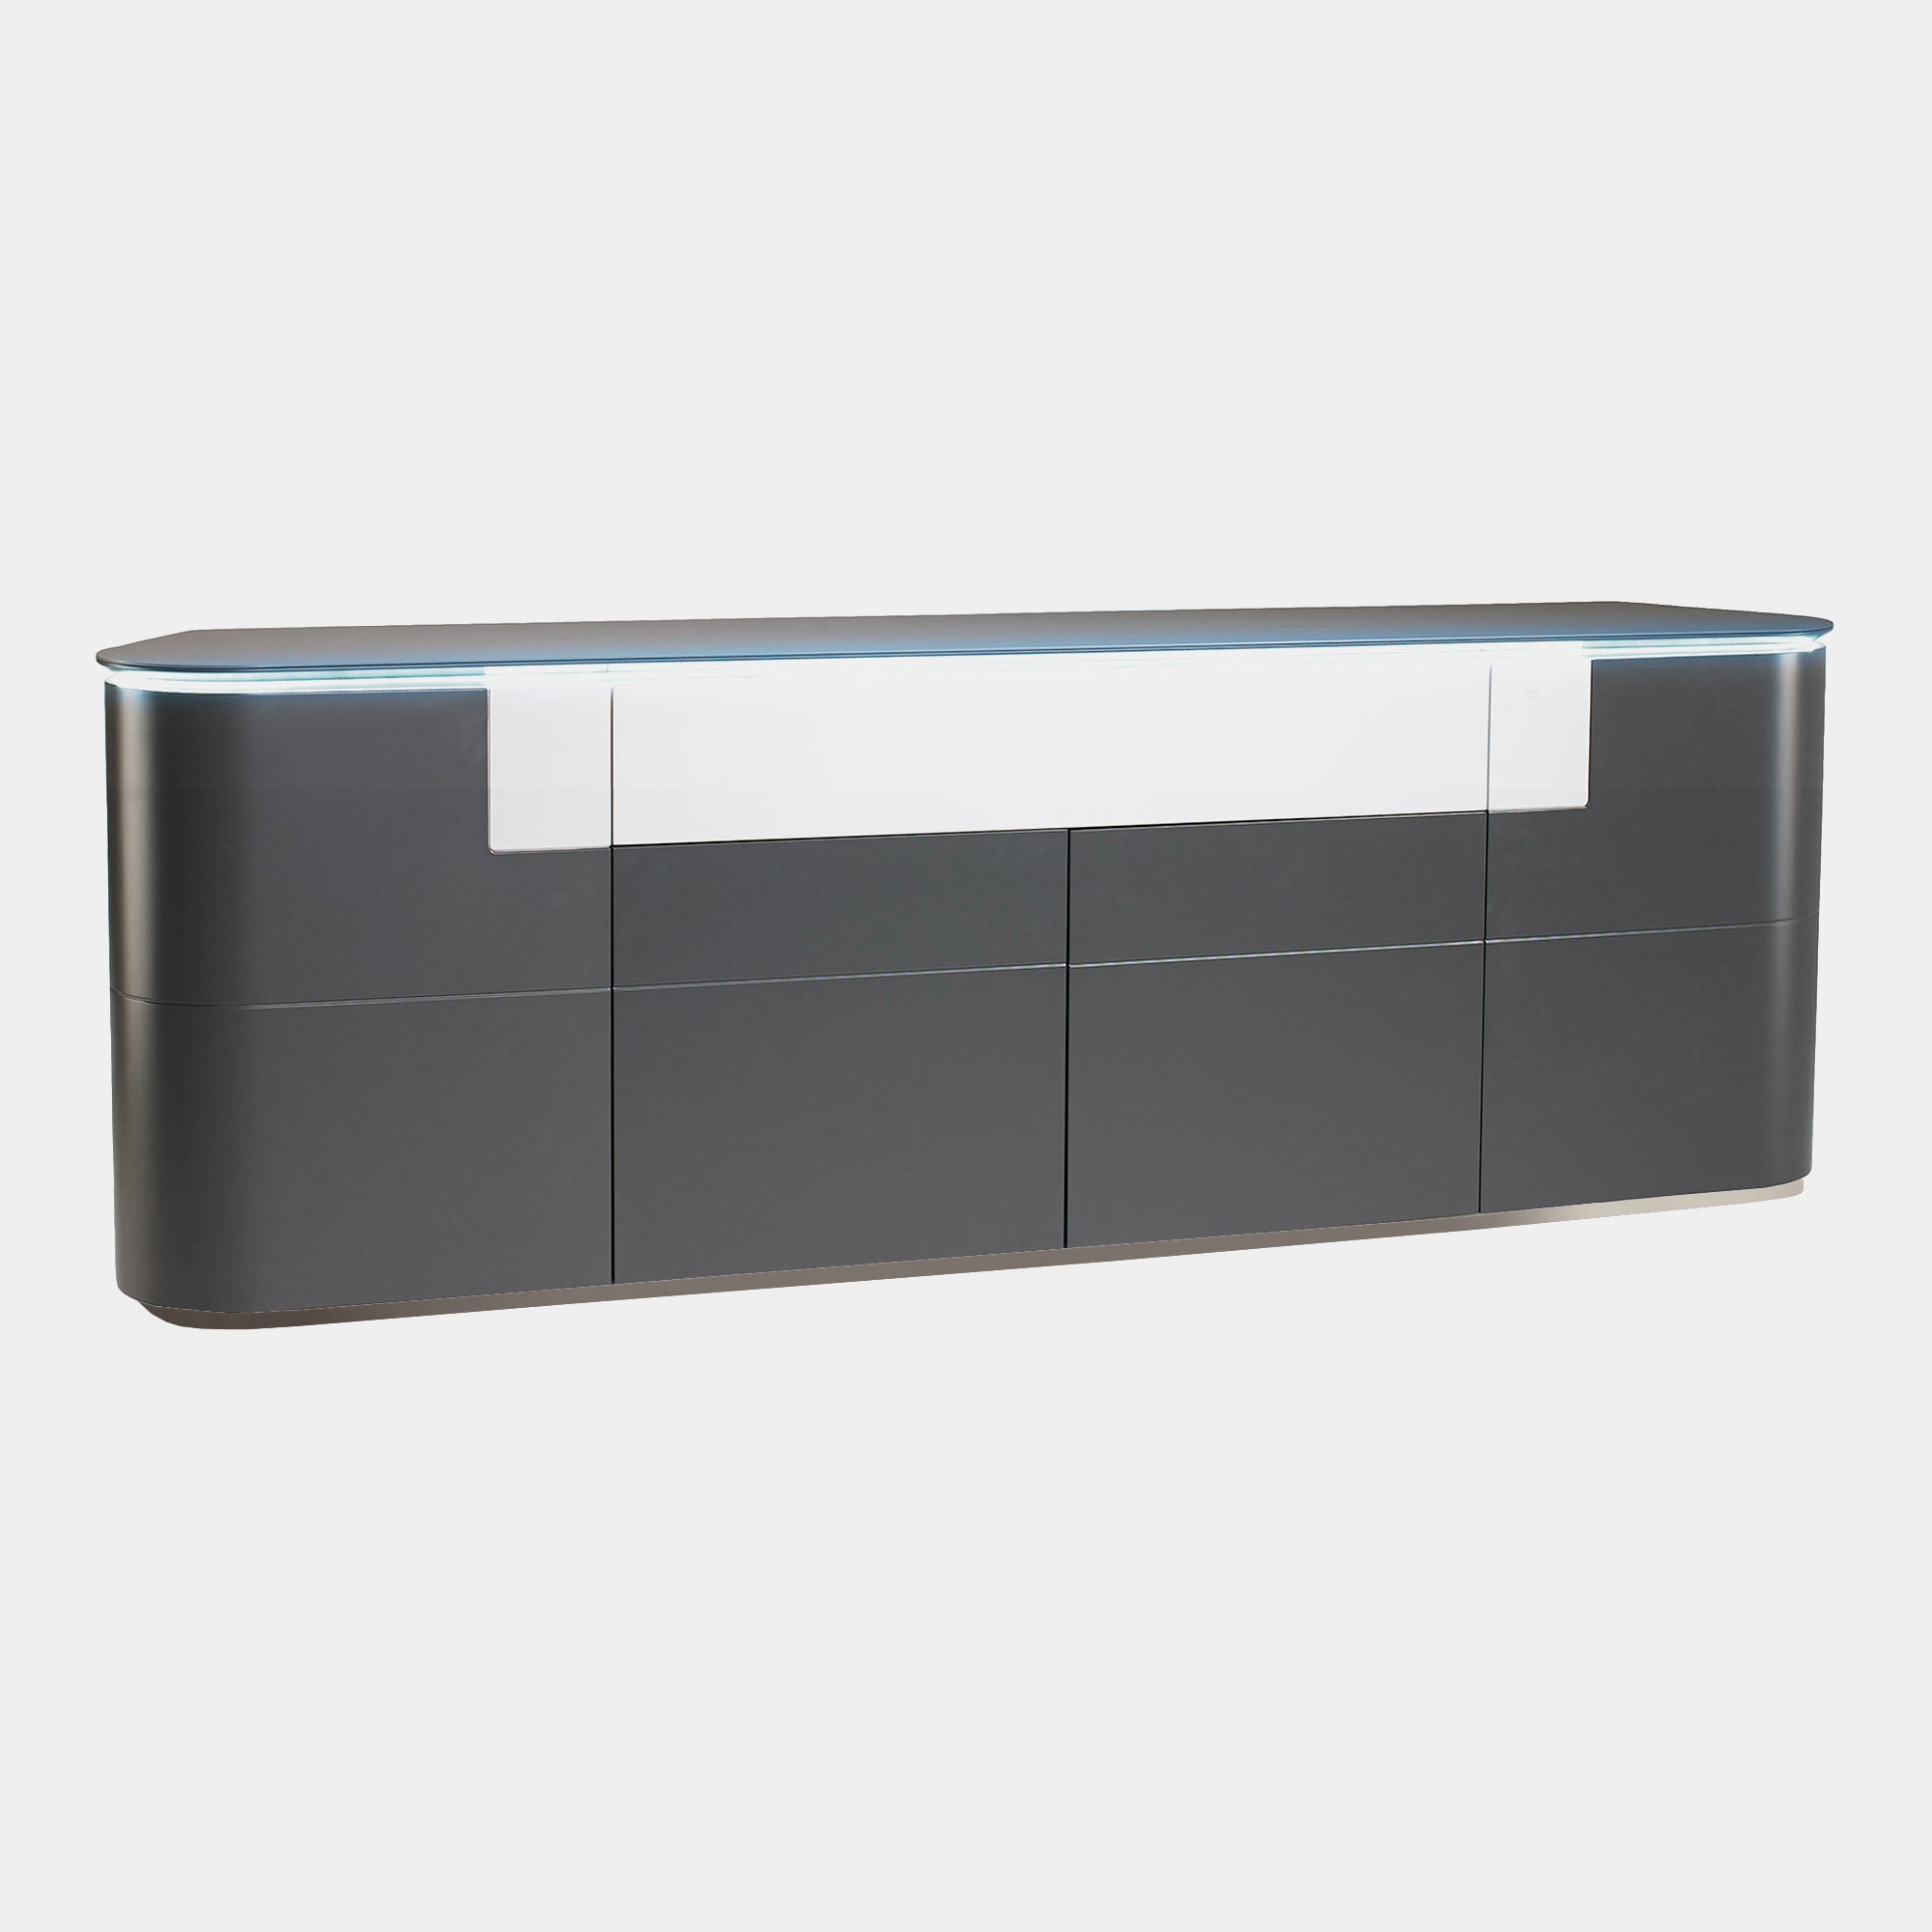 240cm Sideboard on Plinth In Matt Finish Laquered Structure/Painted Glass Top Without LED